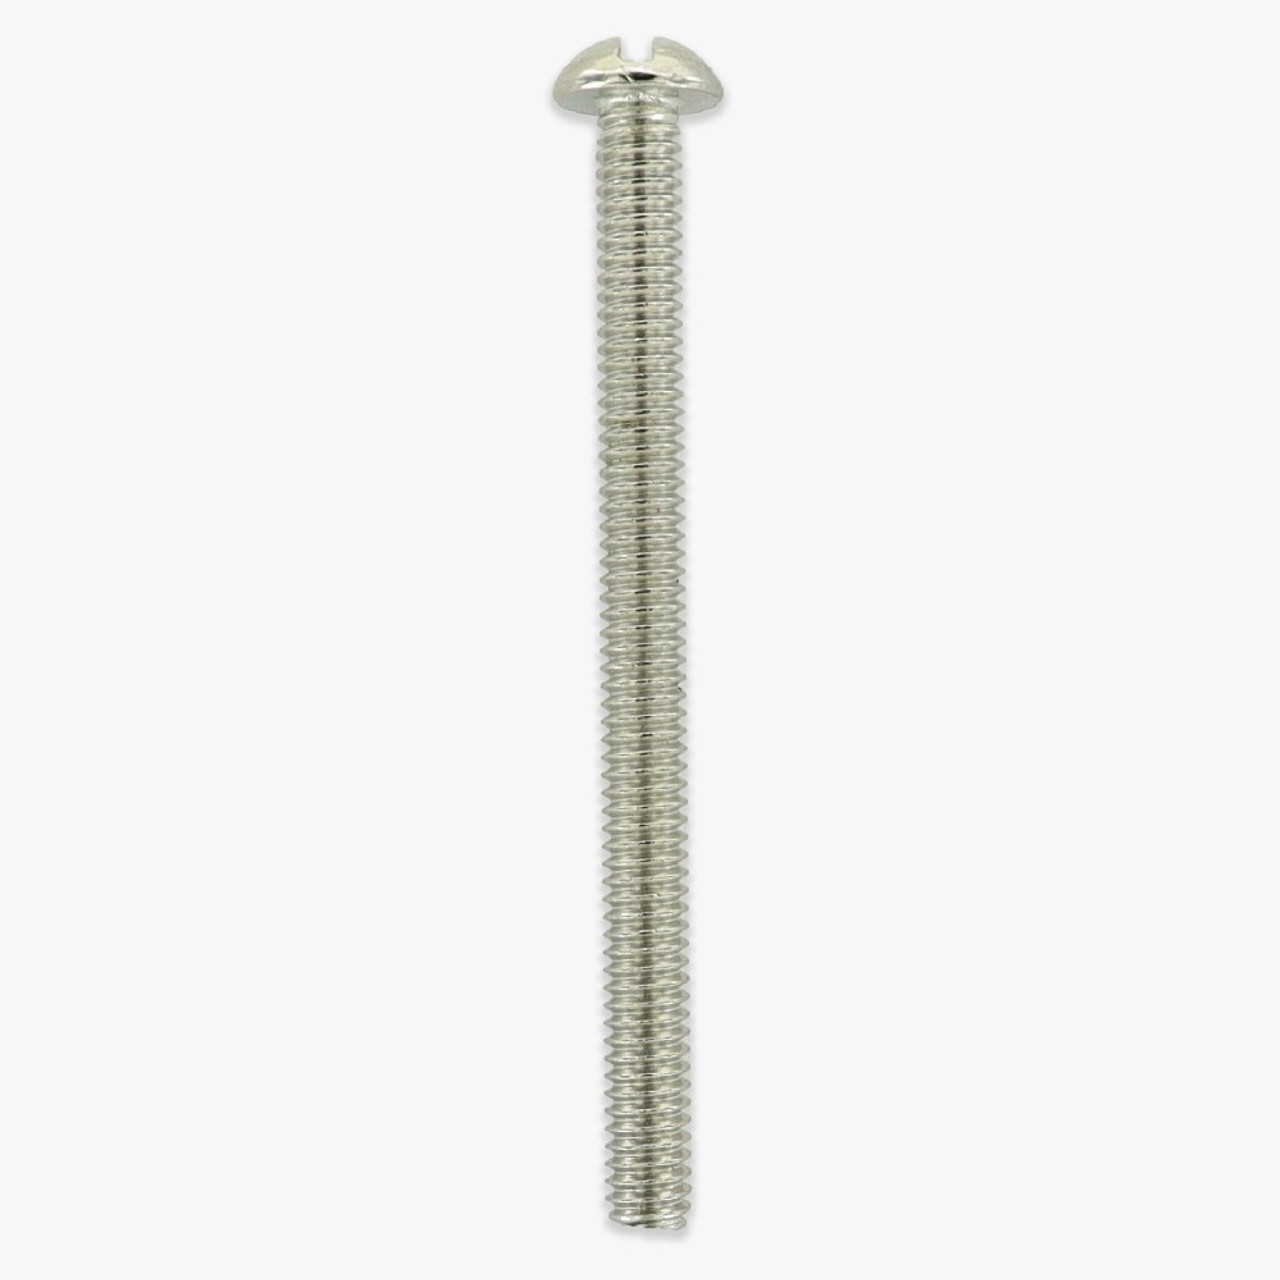 Hook Wrench Spanner Adjustable Round Square Head Screw Nuts Bolts